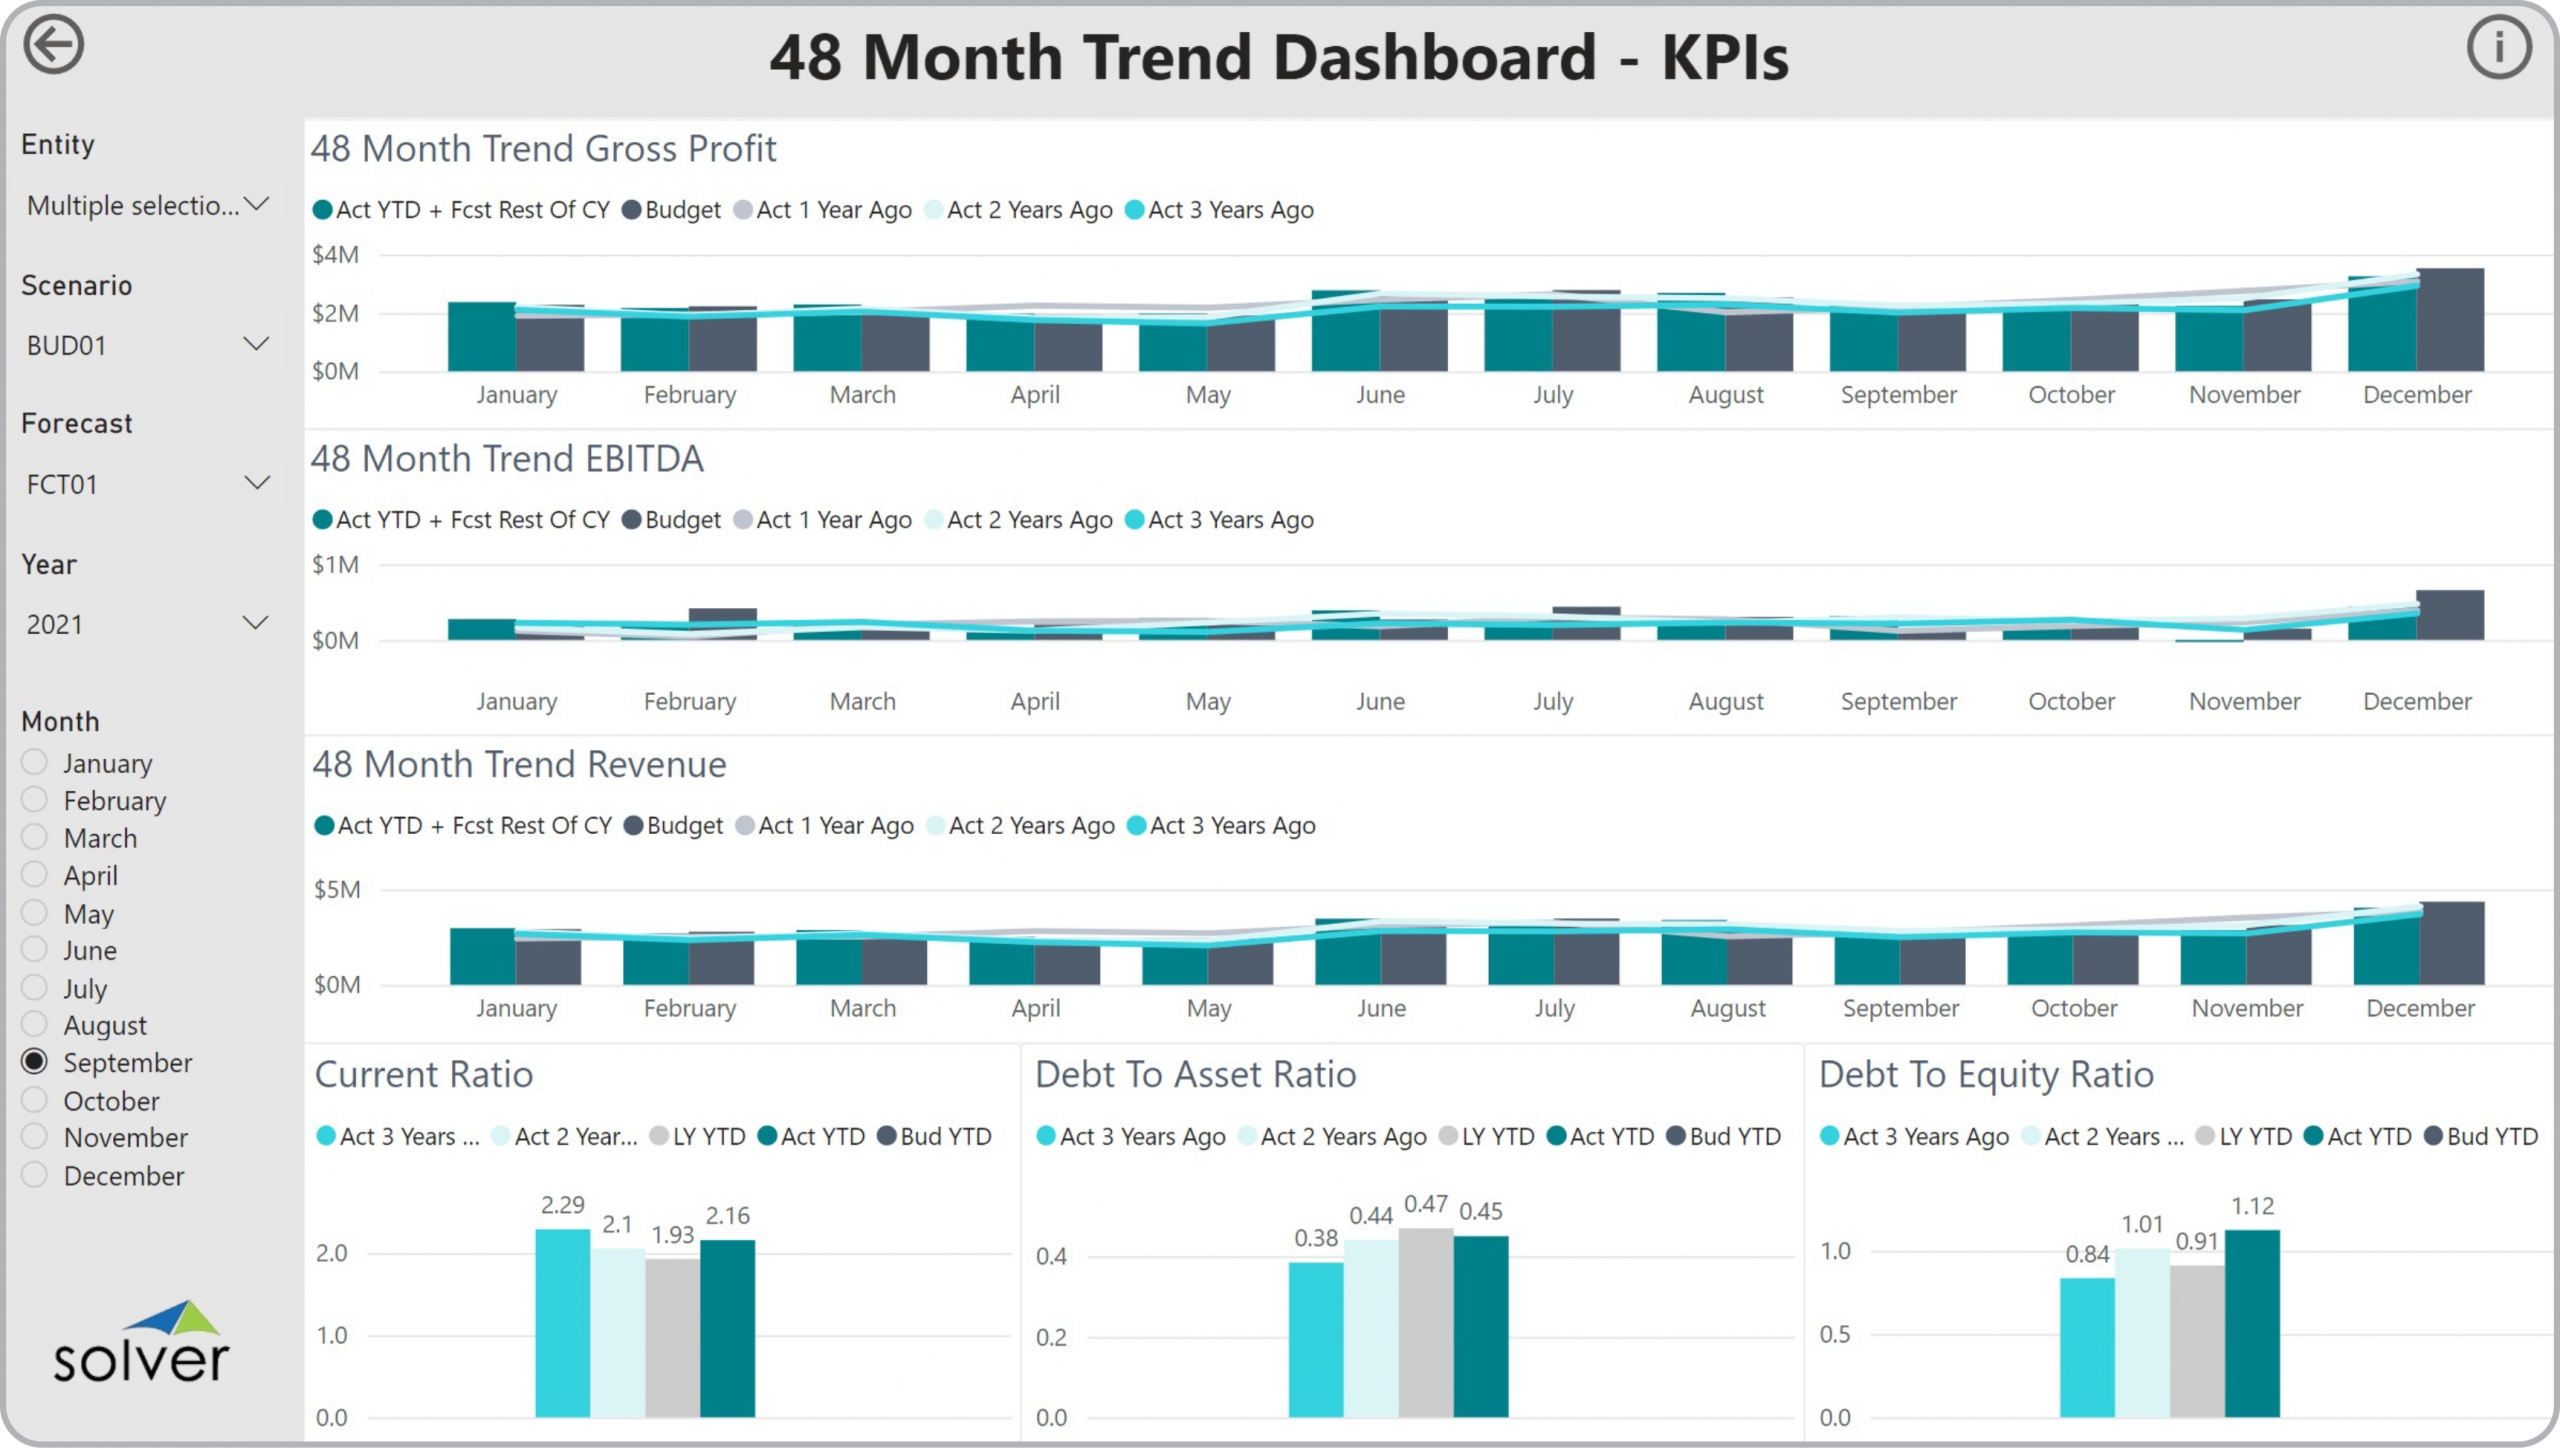 Example of a 48 Month KPI Trend Dashboard to Streamline the Monthly Reporting Process